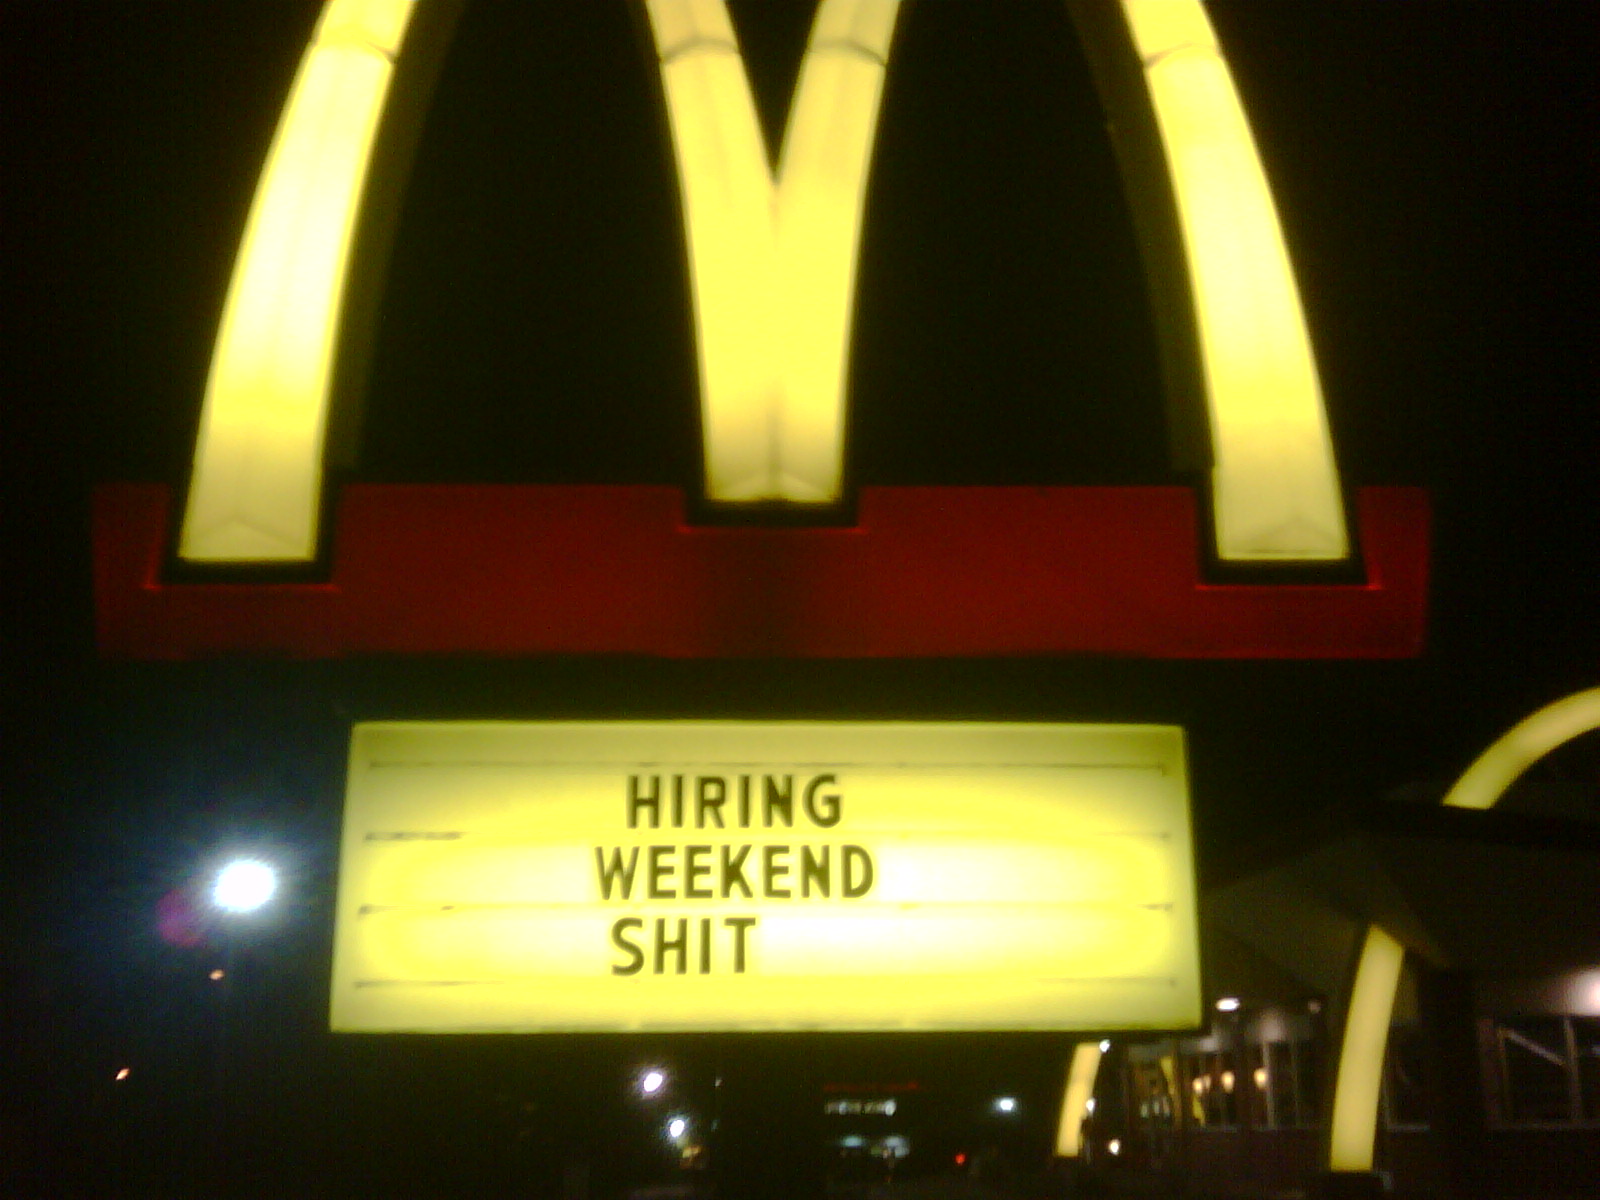 Mc Donalds sign, took this in duluth minnesota